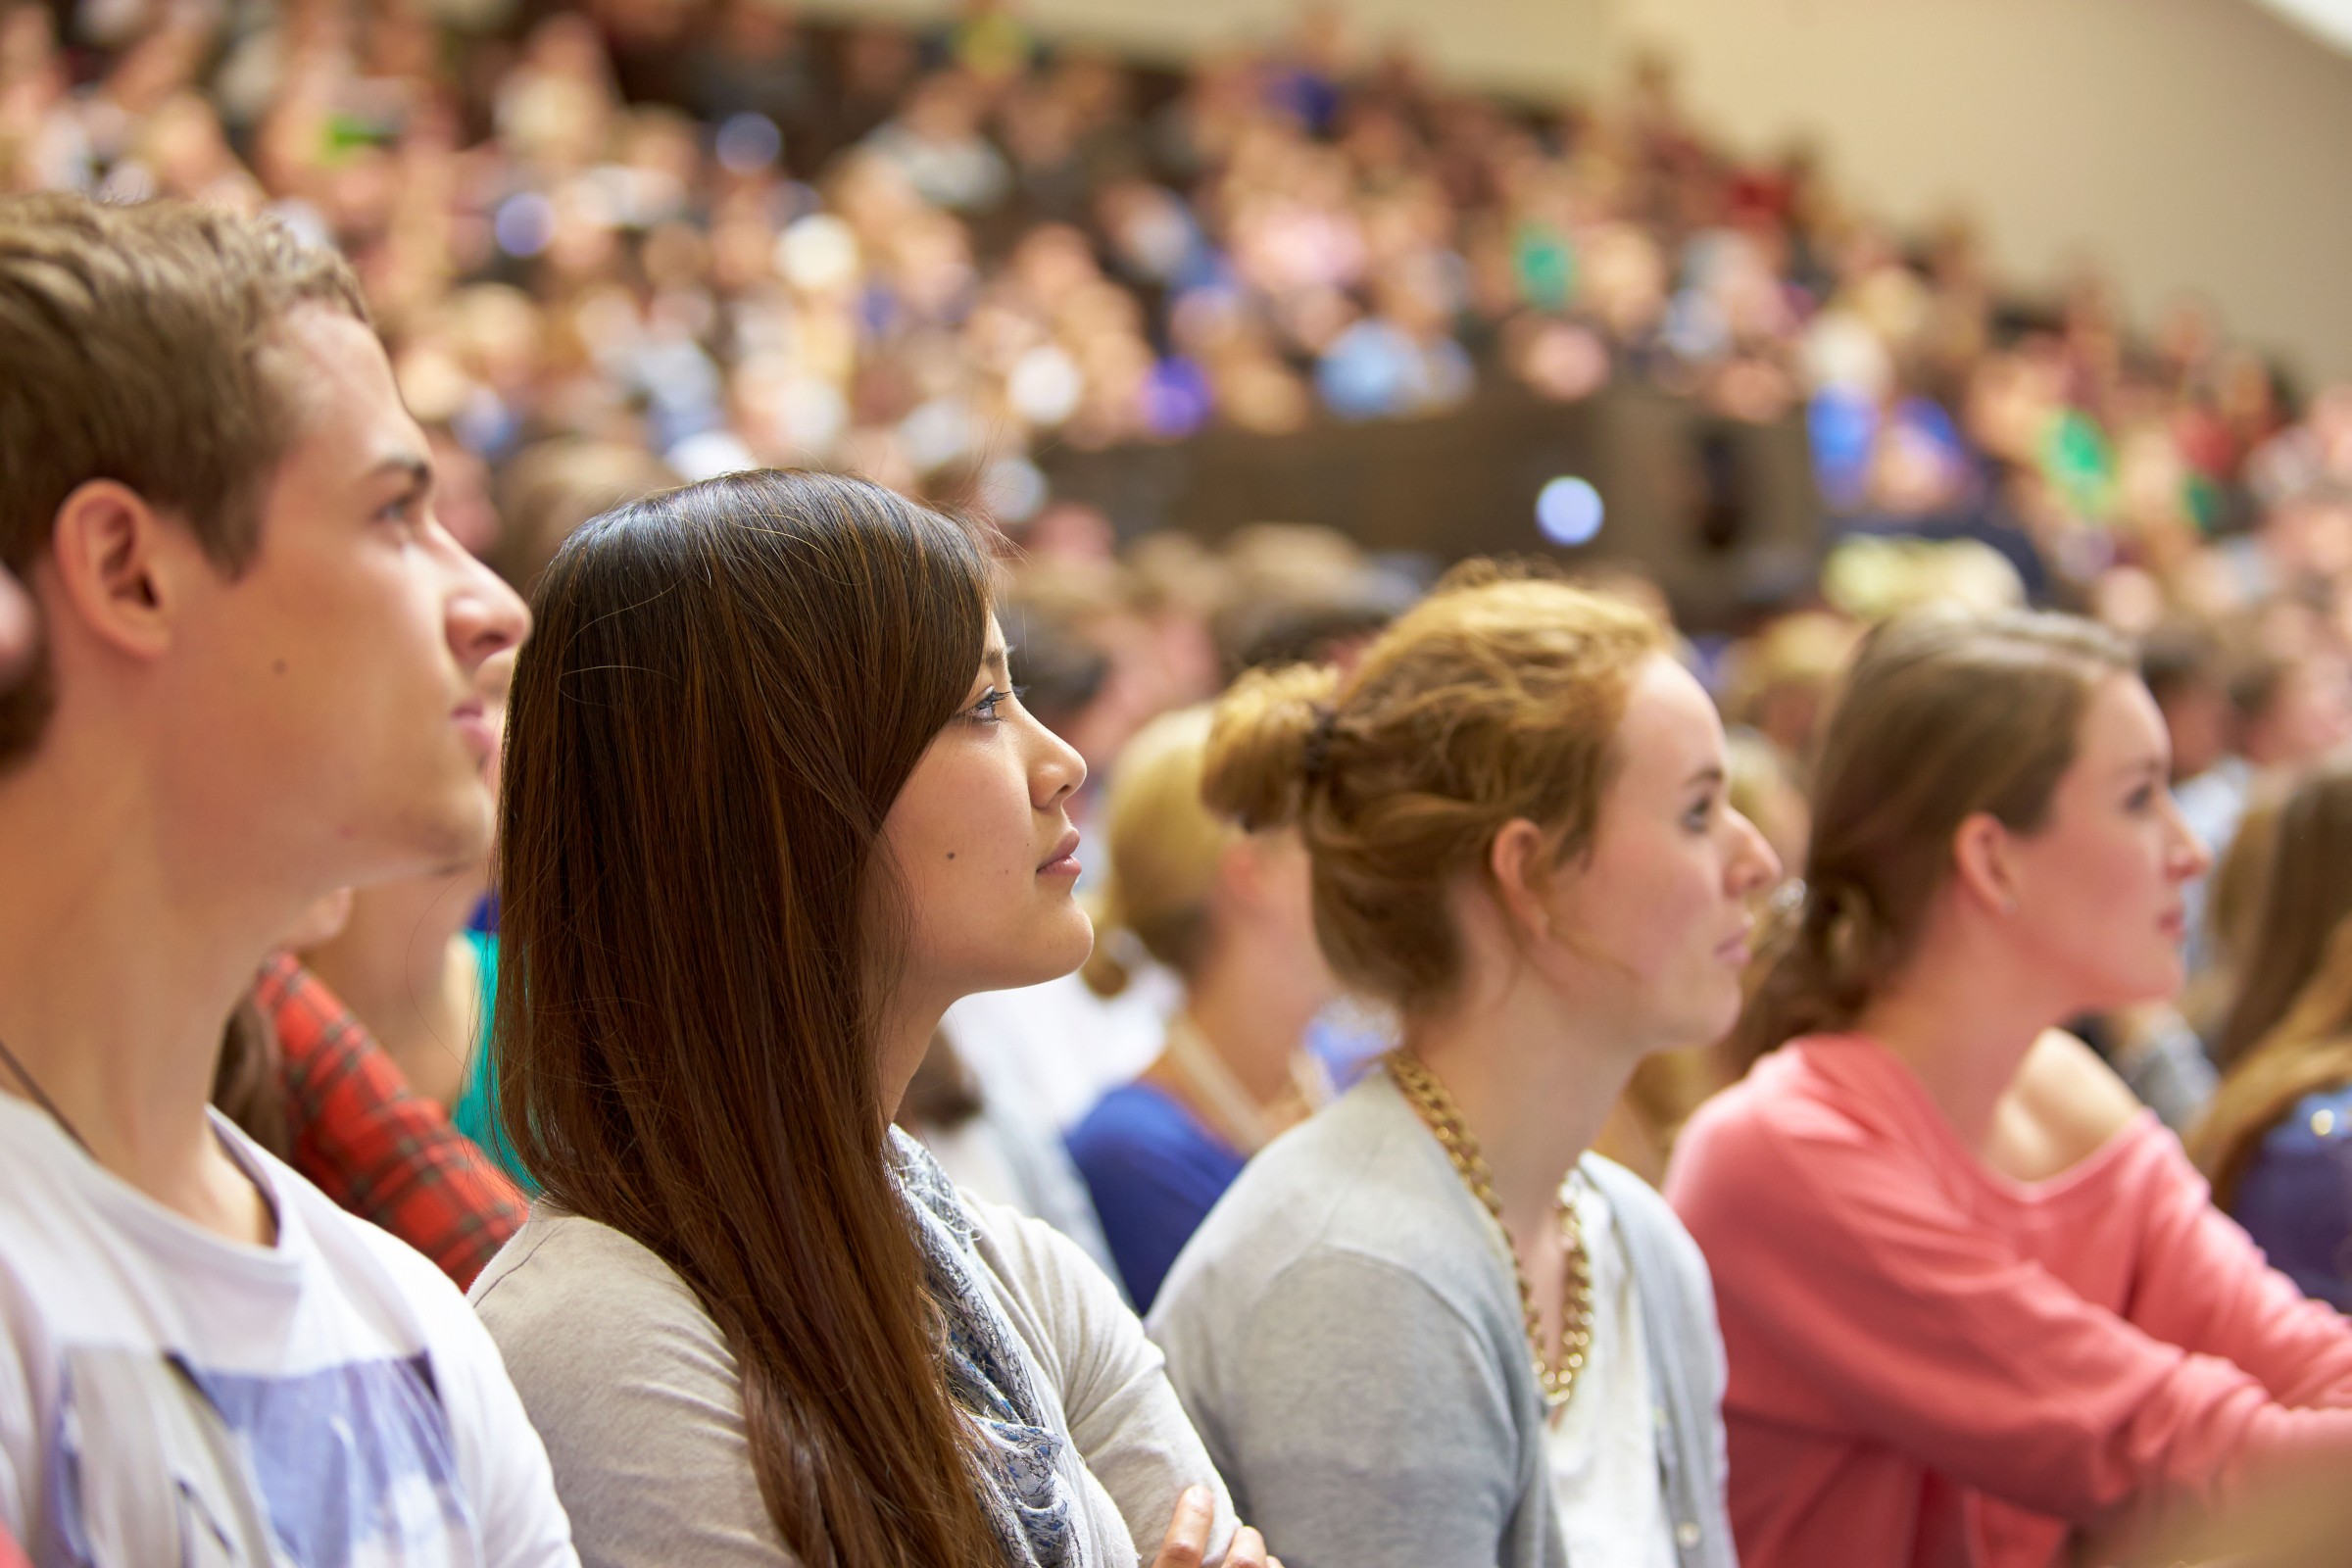 Students during a lecture in the main auditorium